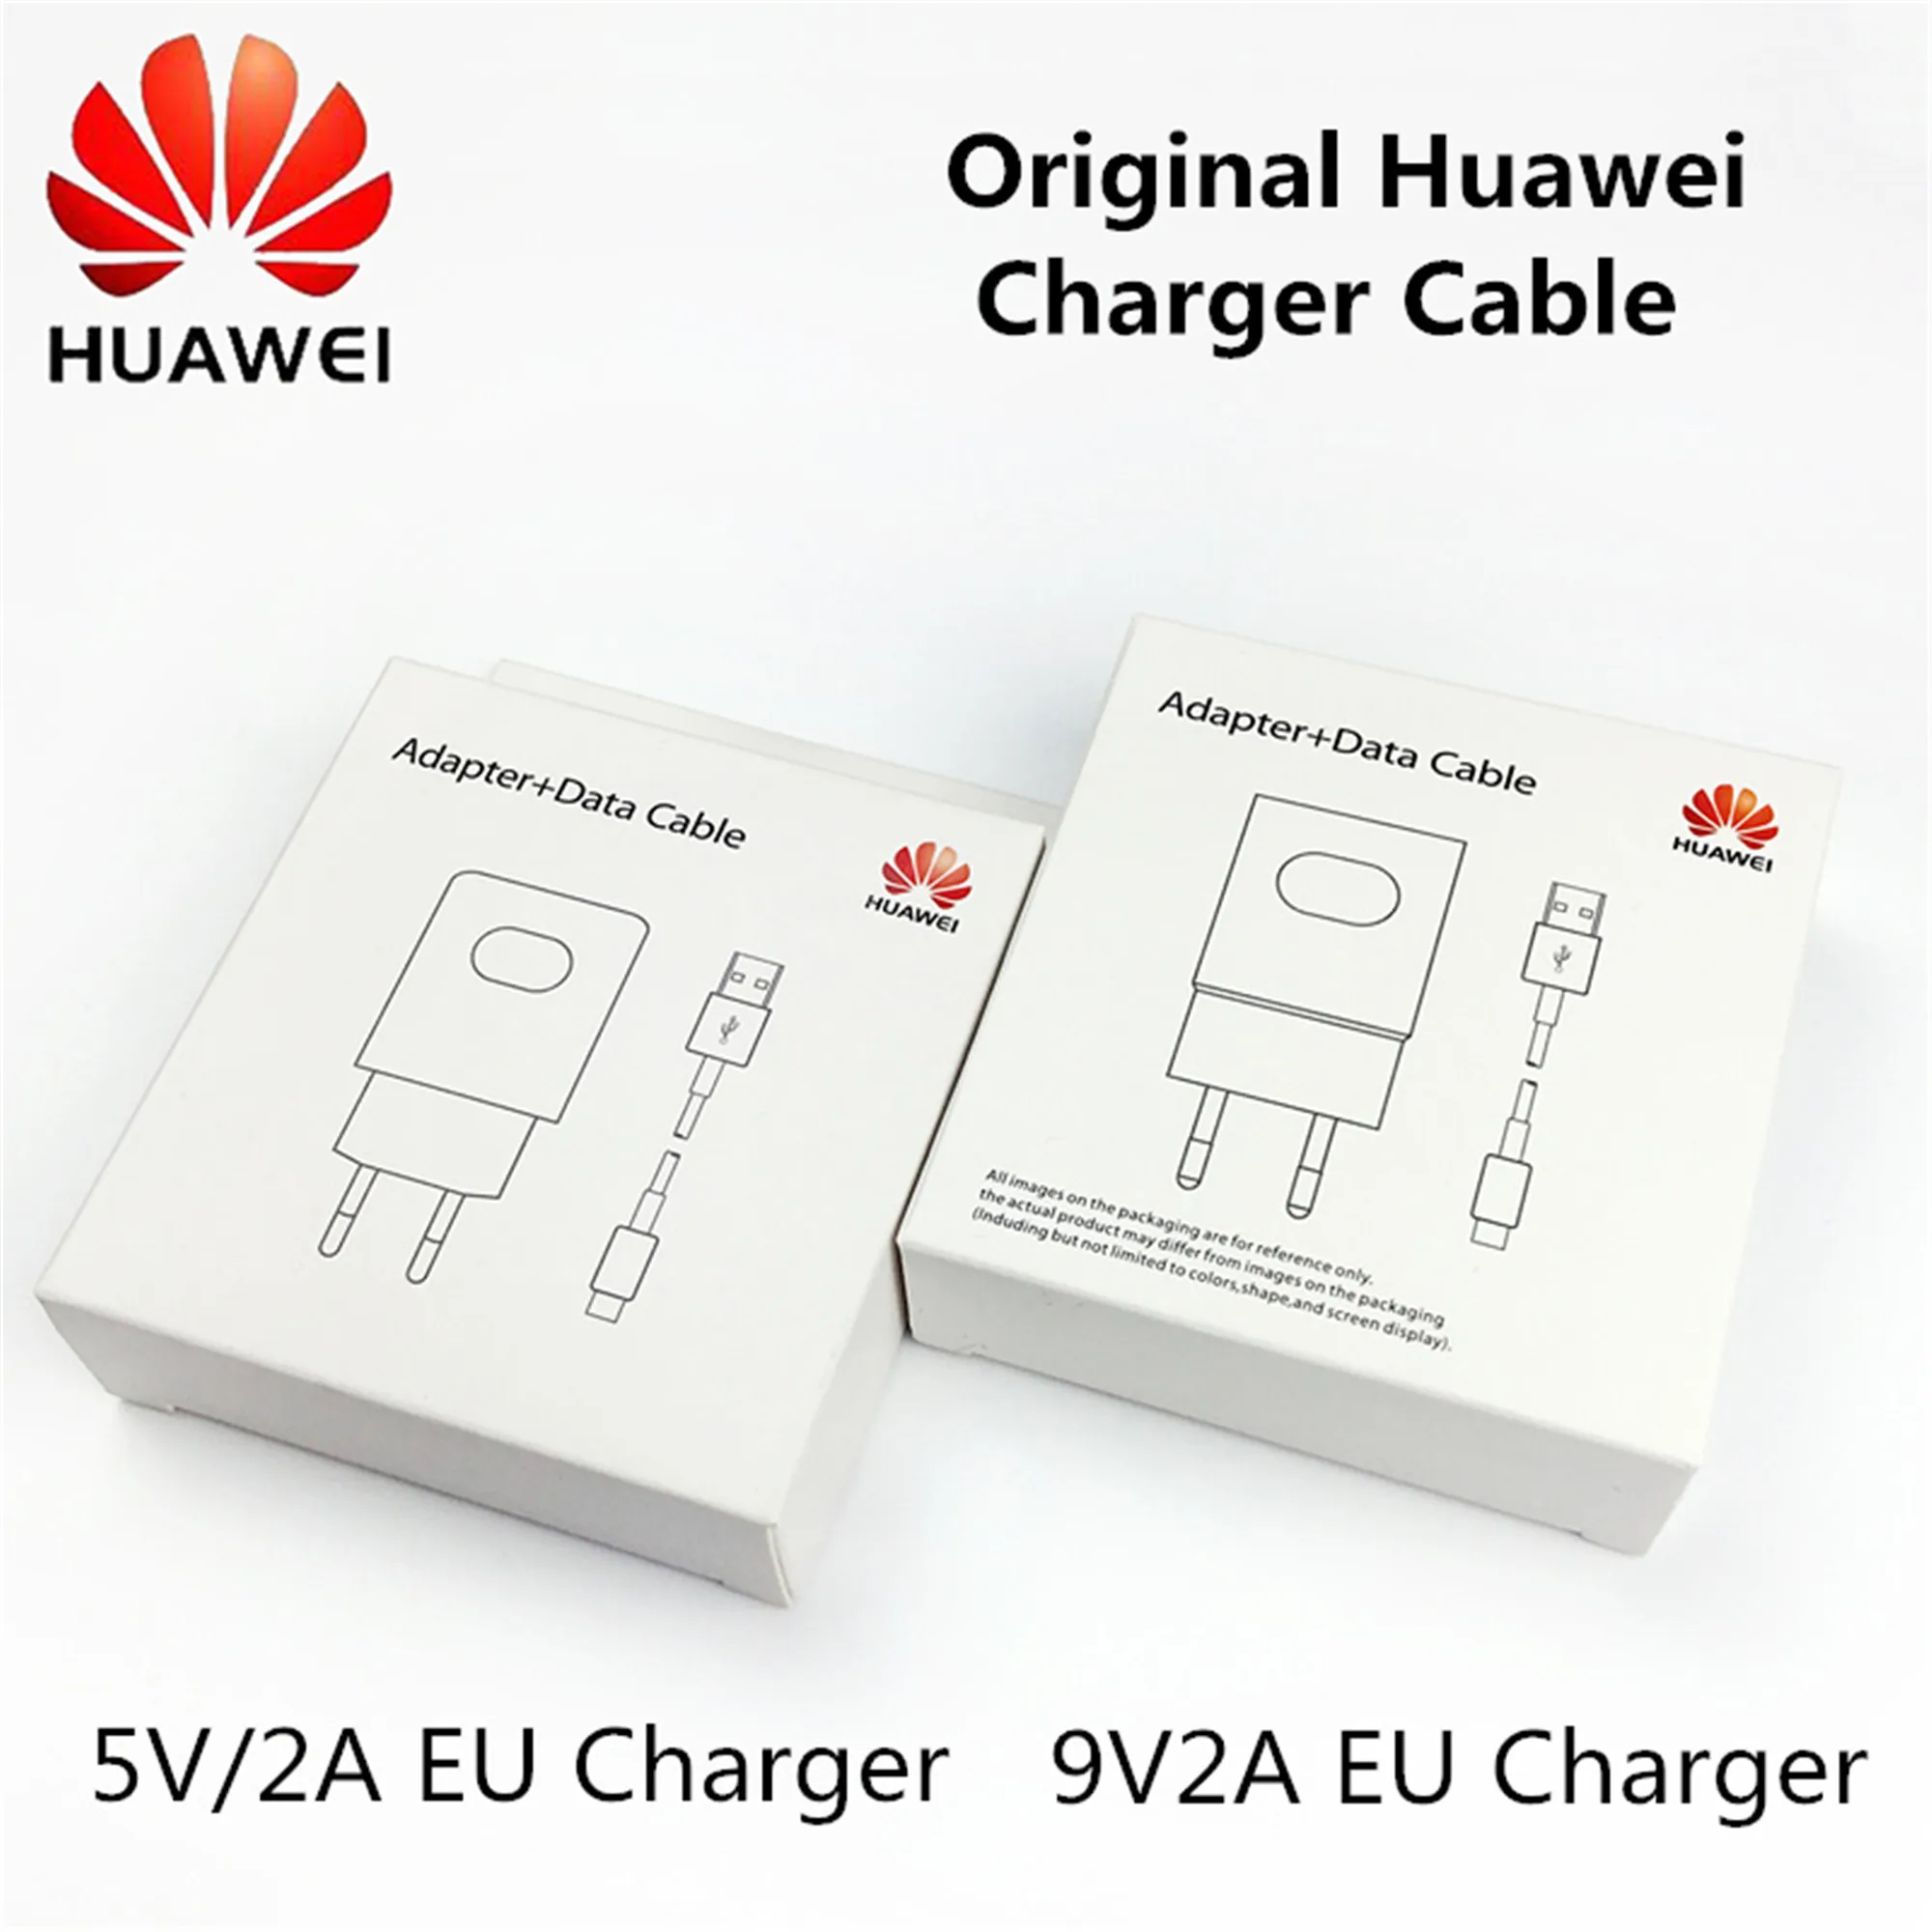 

Original Huawei Fast charger QC 2.0 9V/2A 5V/2A Charge power adapter For nova 3 4 honor play p20 p10 lite mate 20 lite p smart